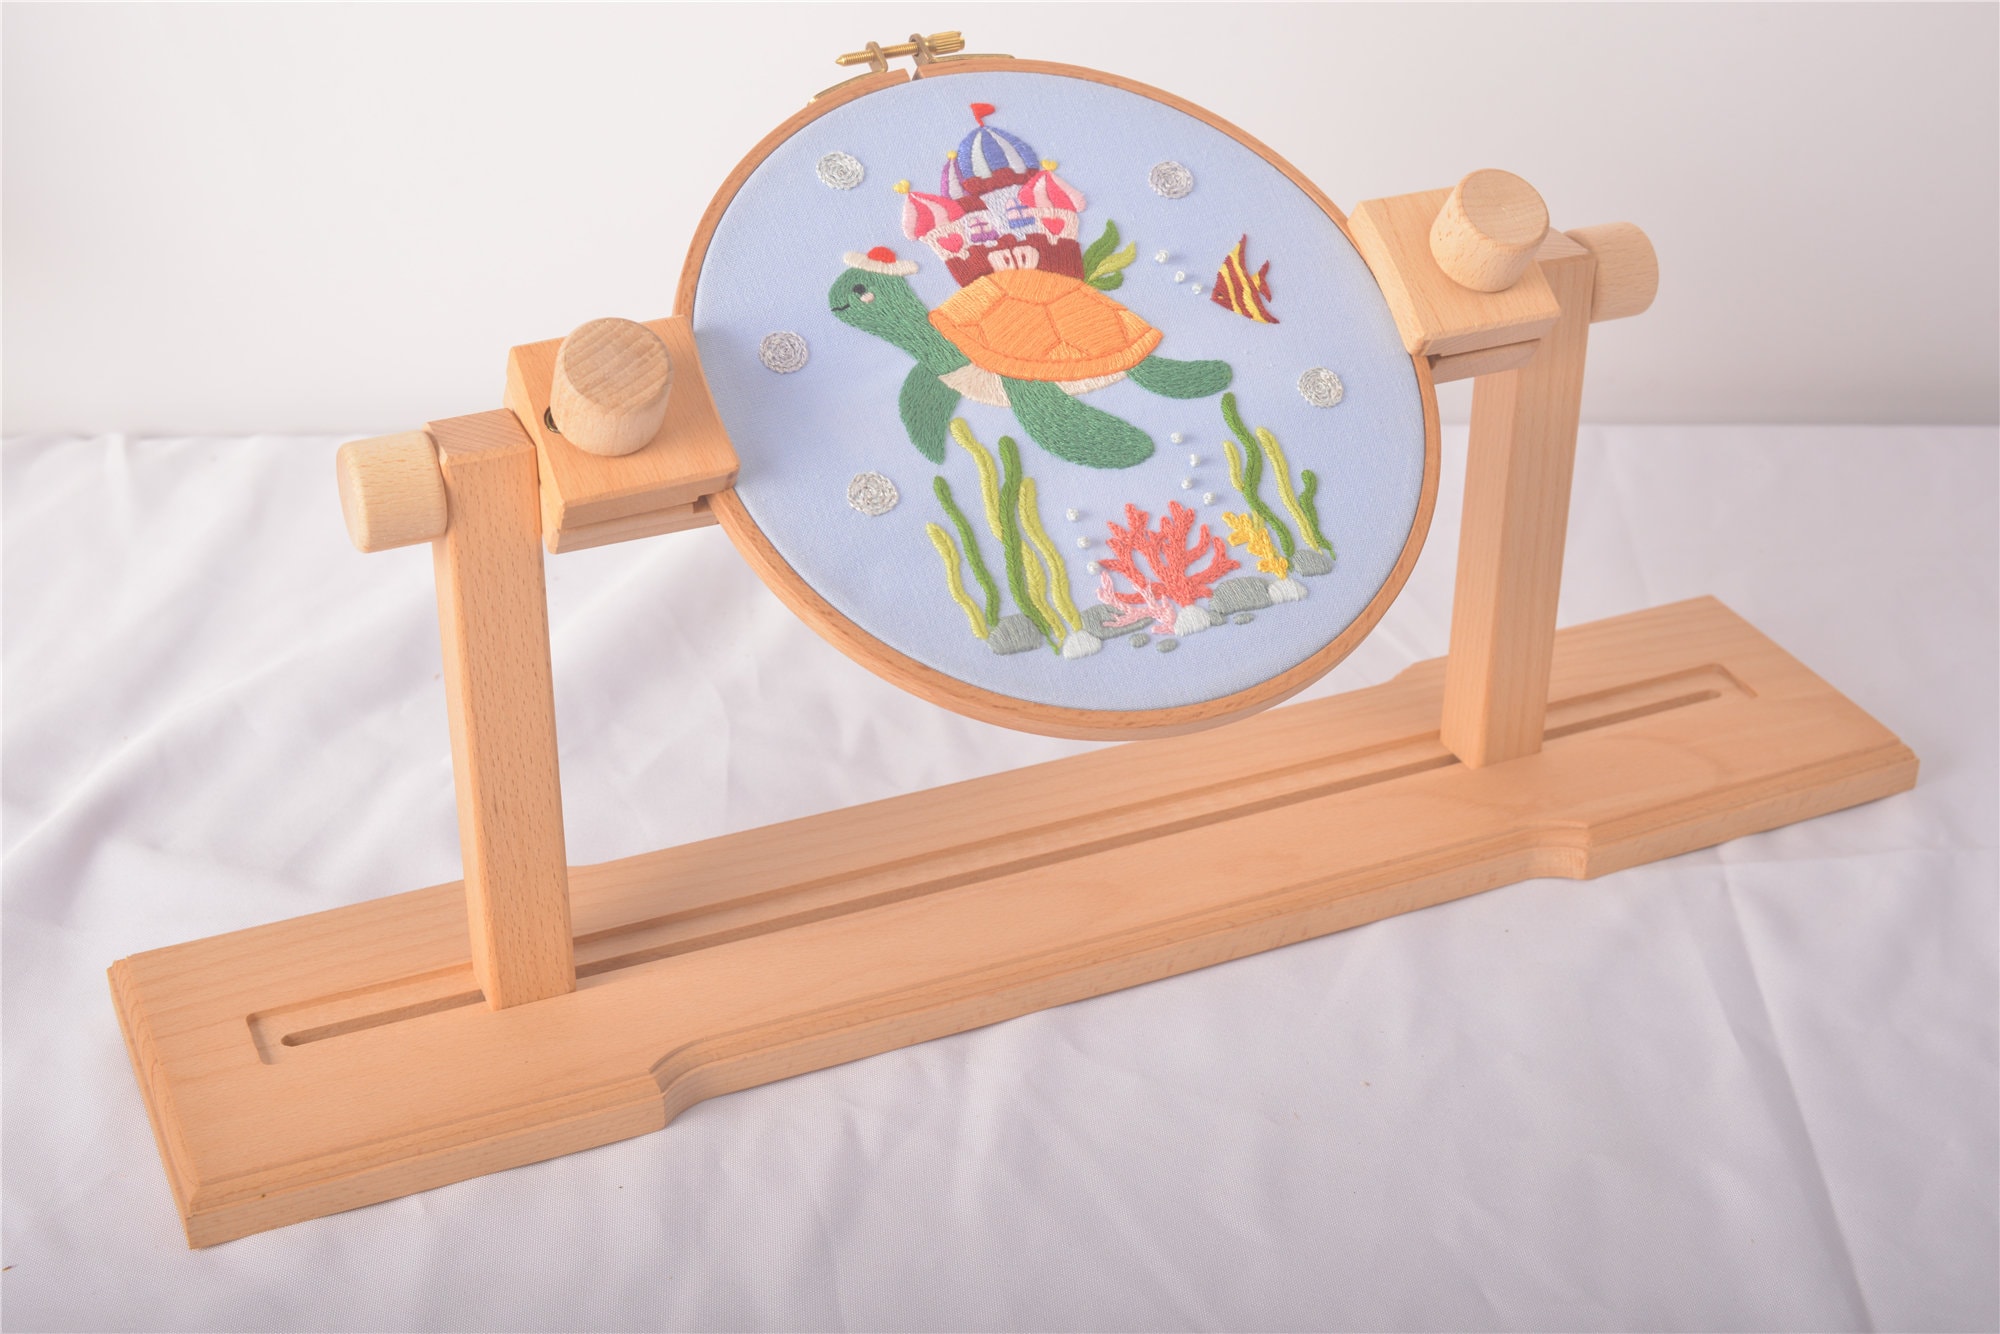 Flexible Embroidery Hoop Table Seat Stand | Beech Wooden embroidery hoop  holder | Made in the UK | Suitable for embroidery hoops up to 12 Inch (30  cm)